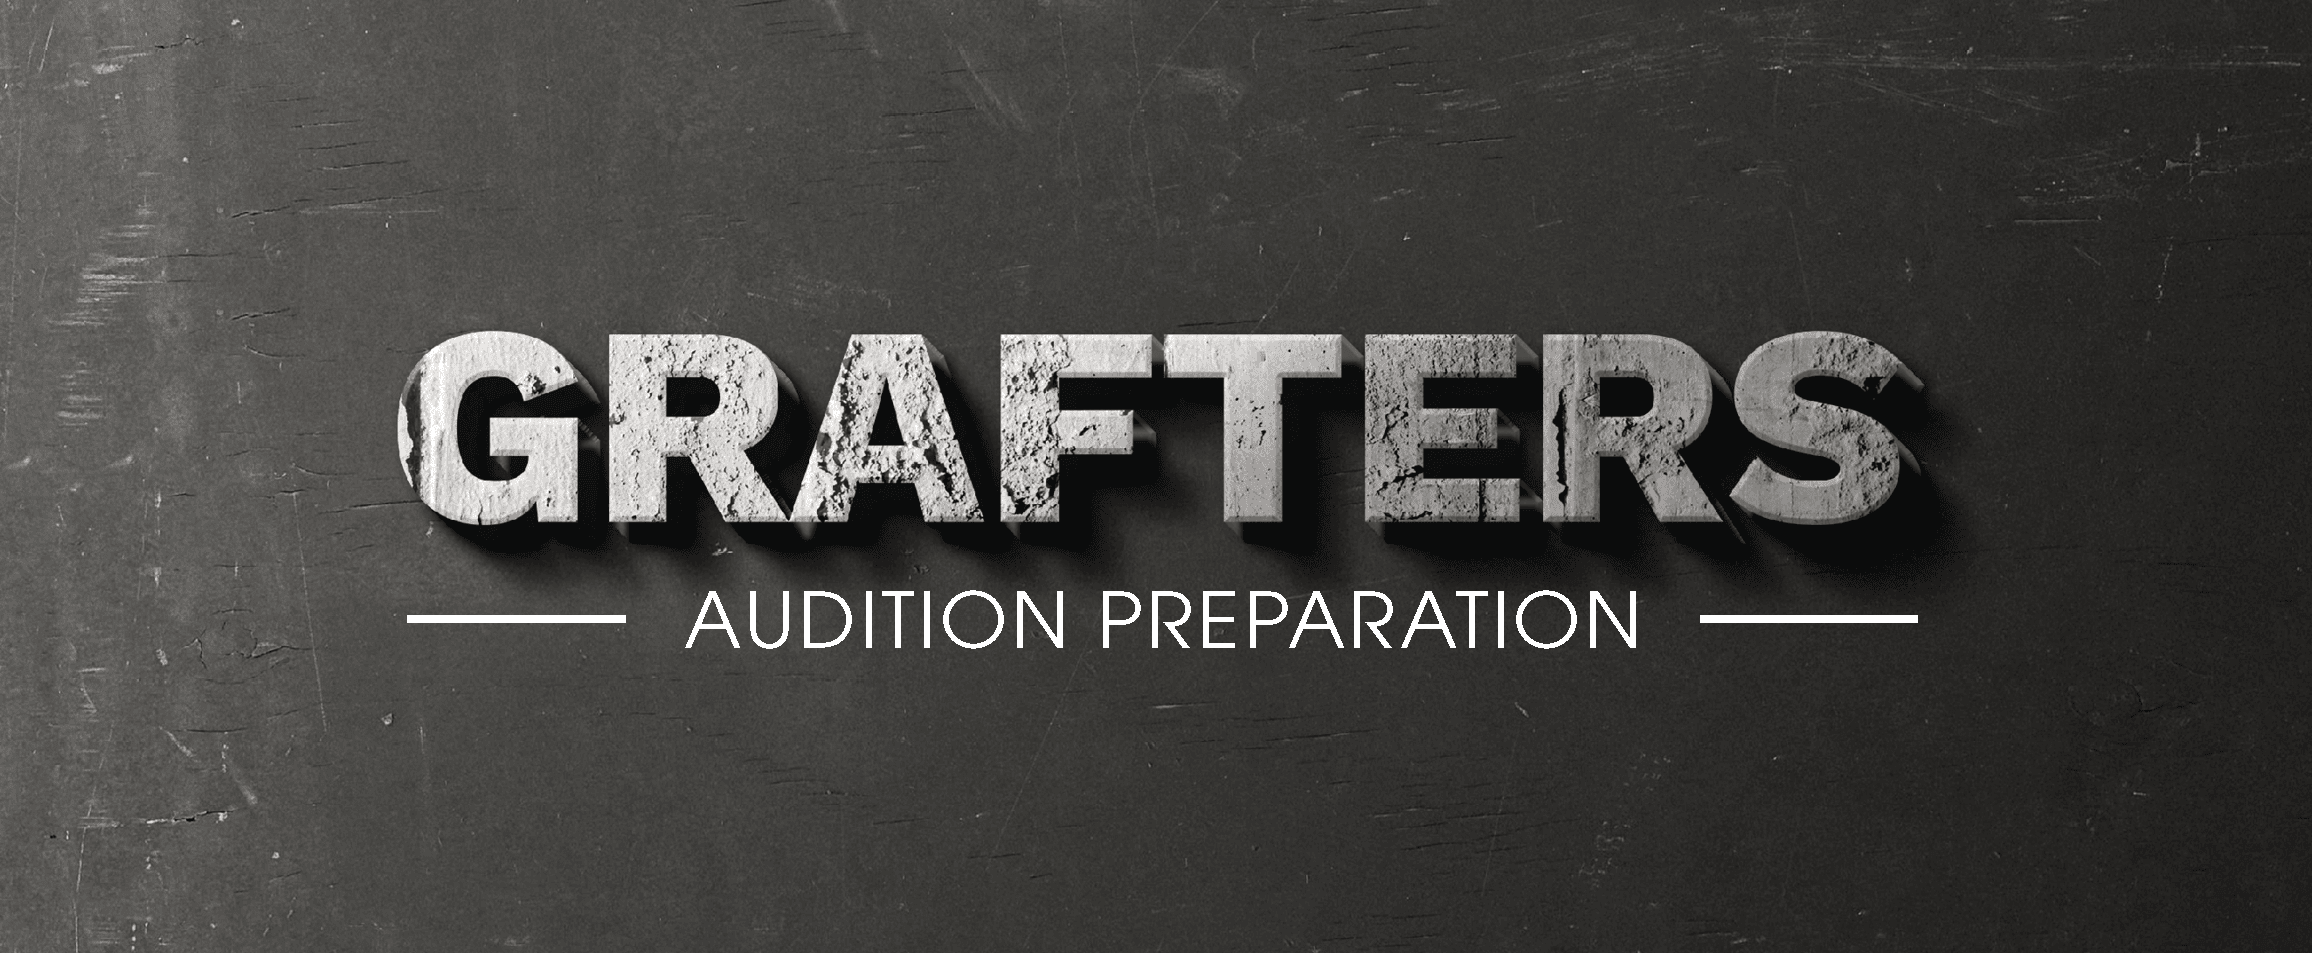 Grafter Audition Preparation